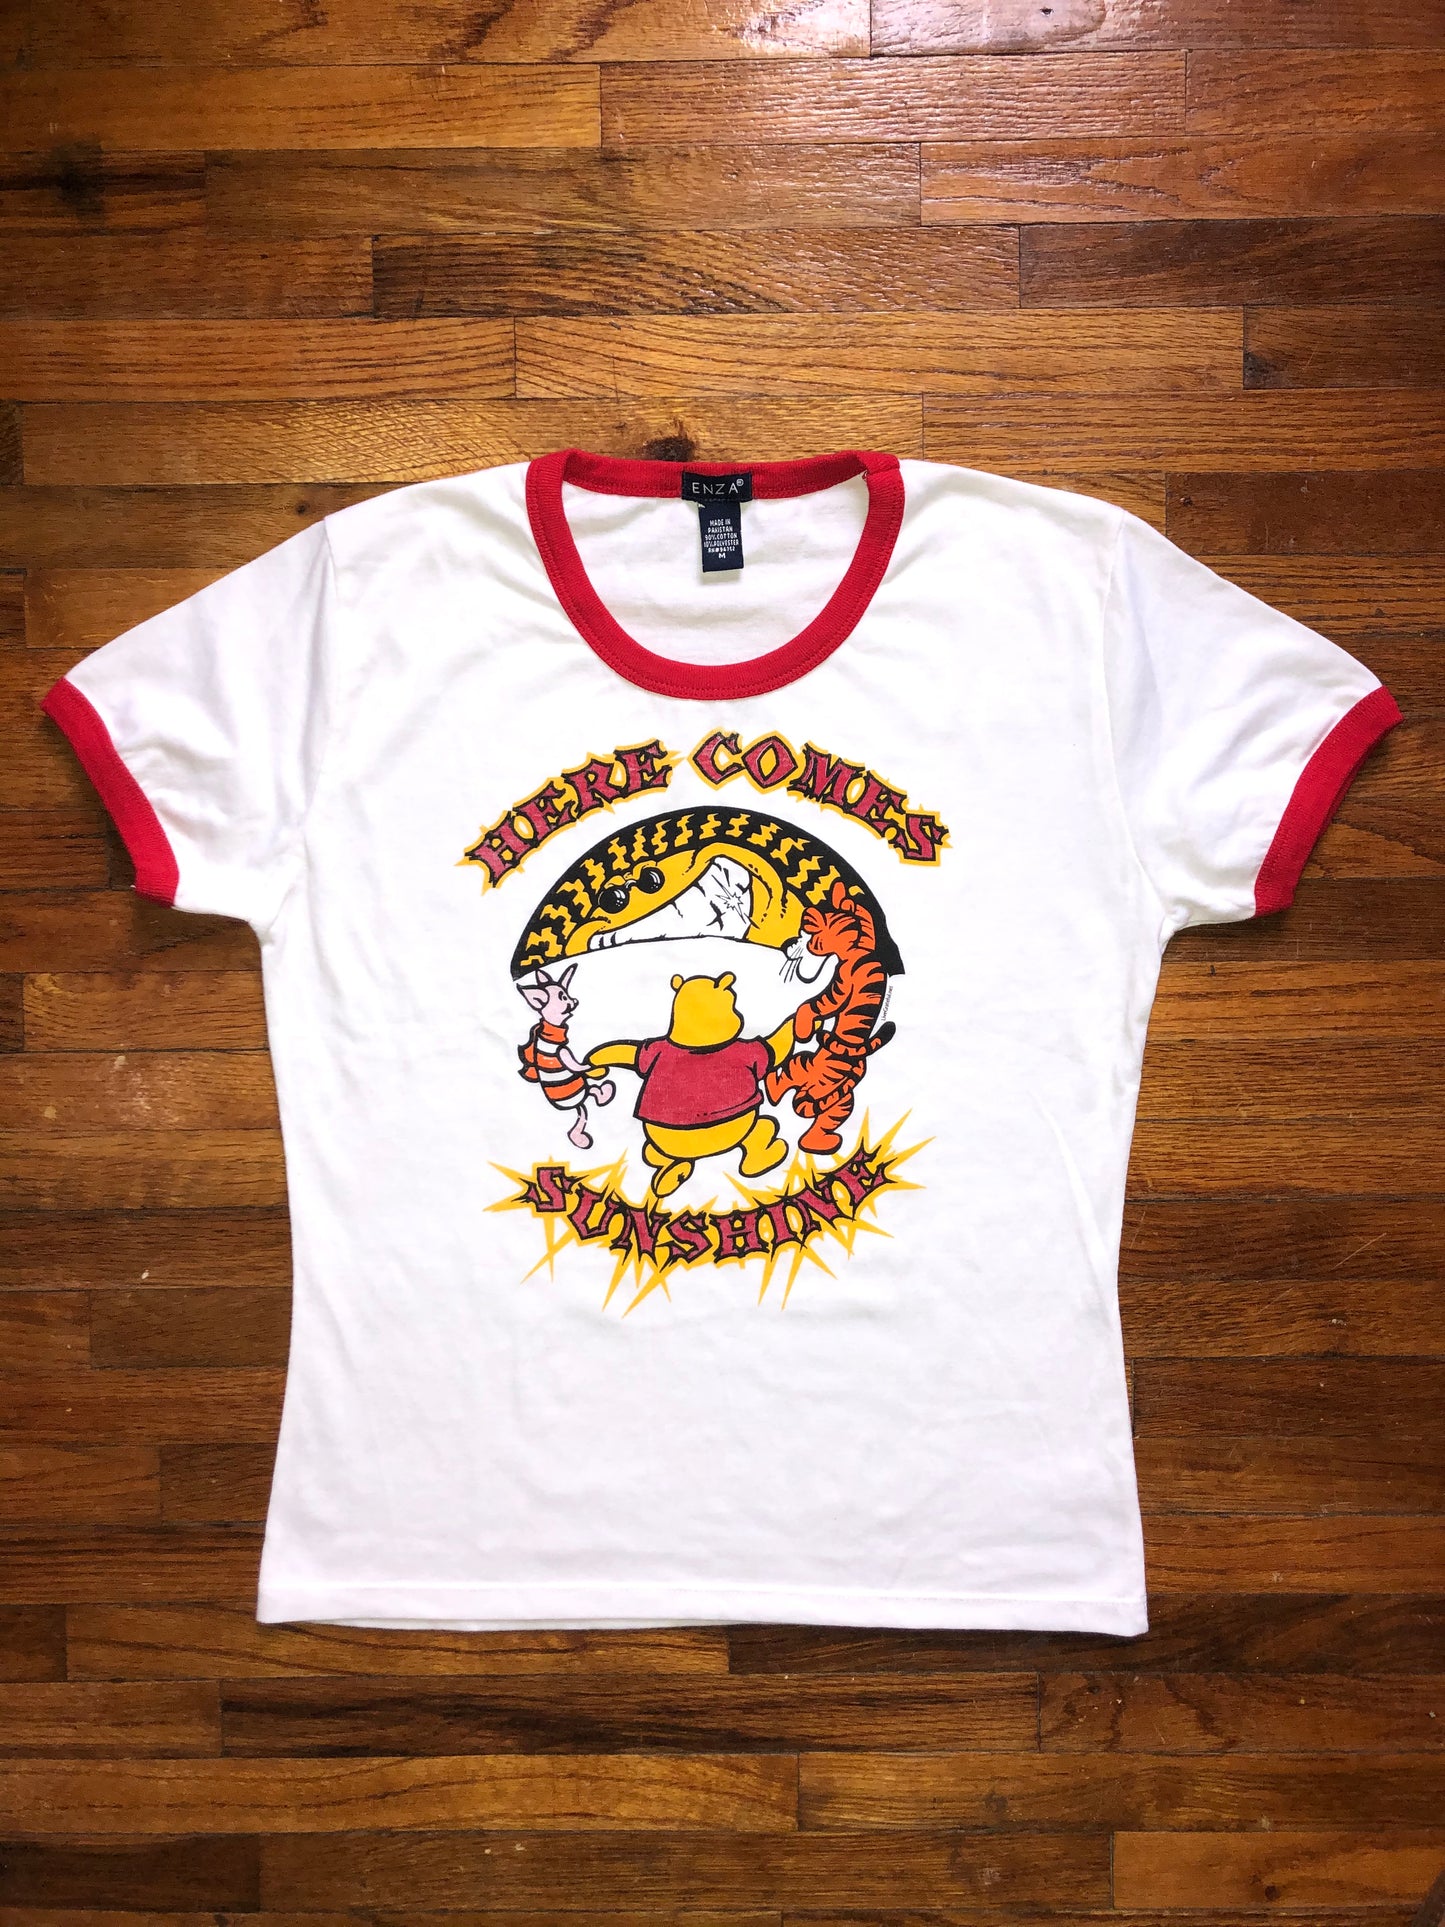 Here Comes Sunshine classic lot shirt from the 90s GRATEFUL DEAD Tee Shirt